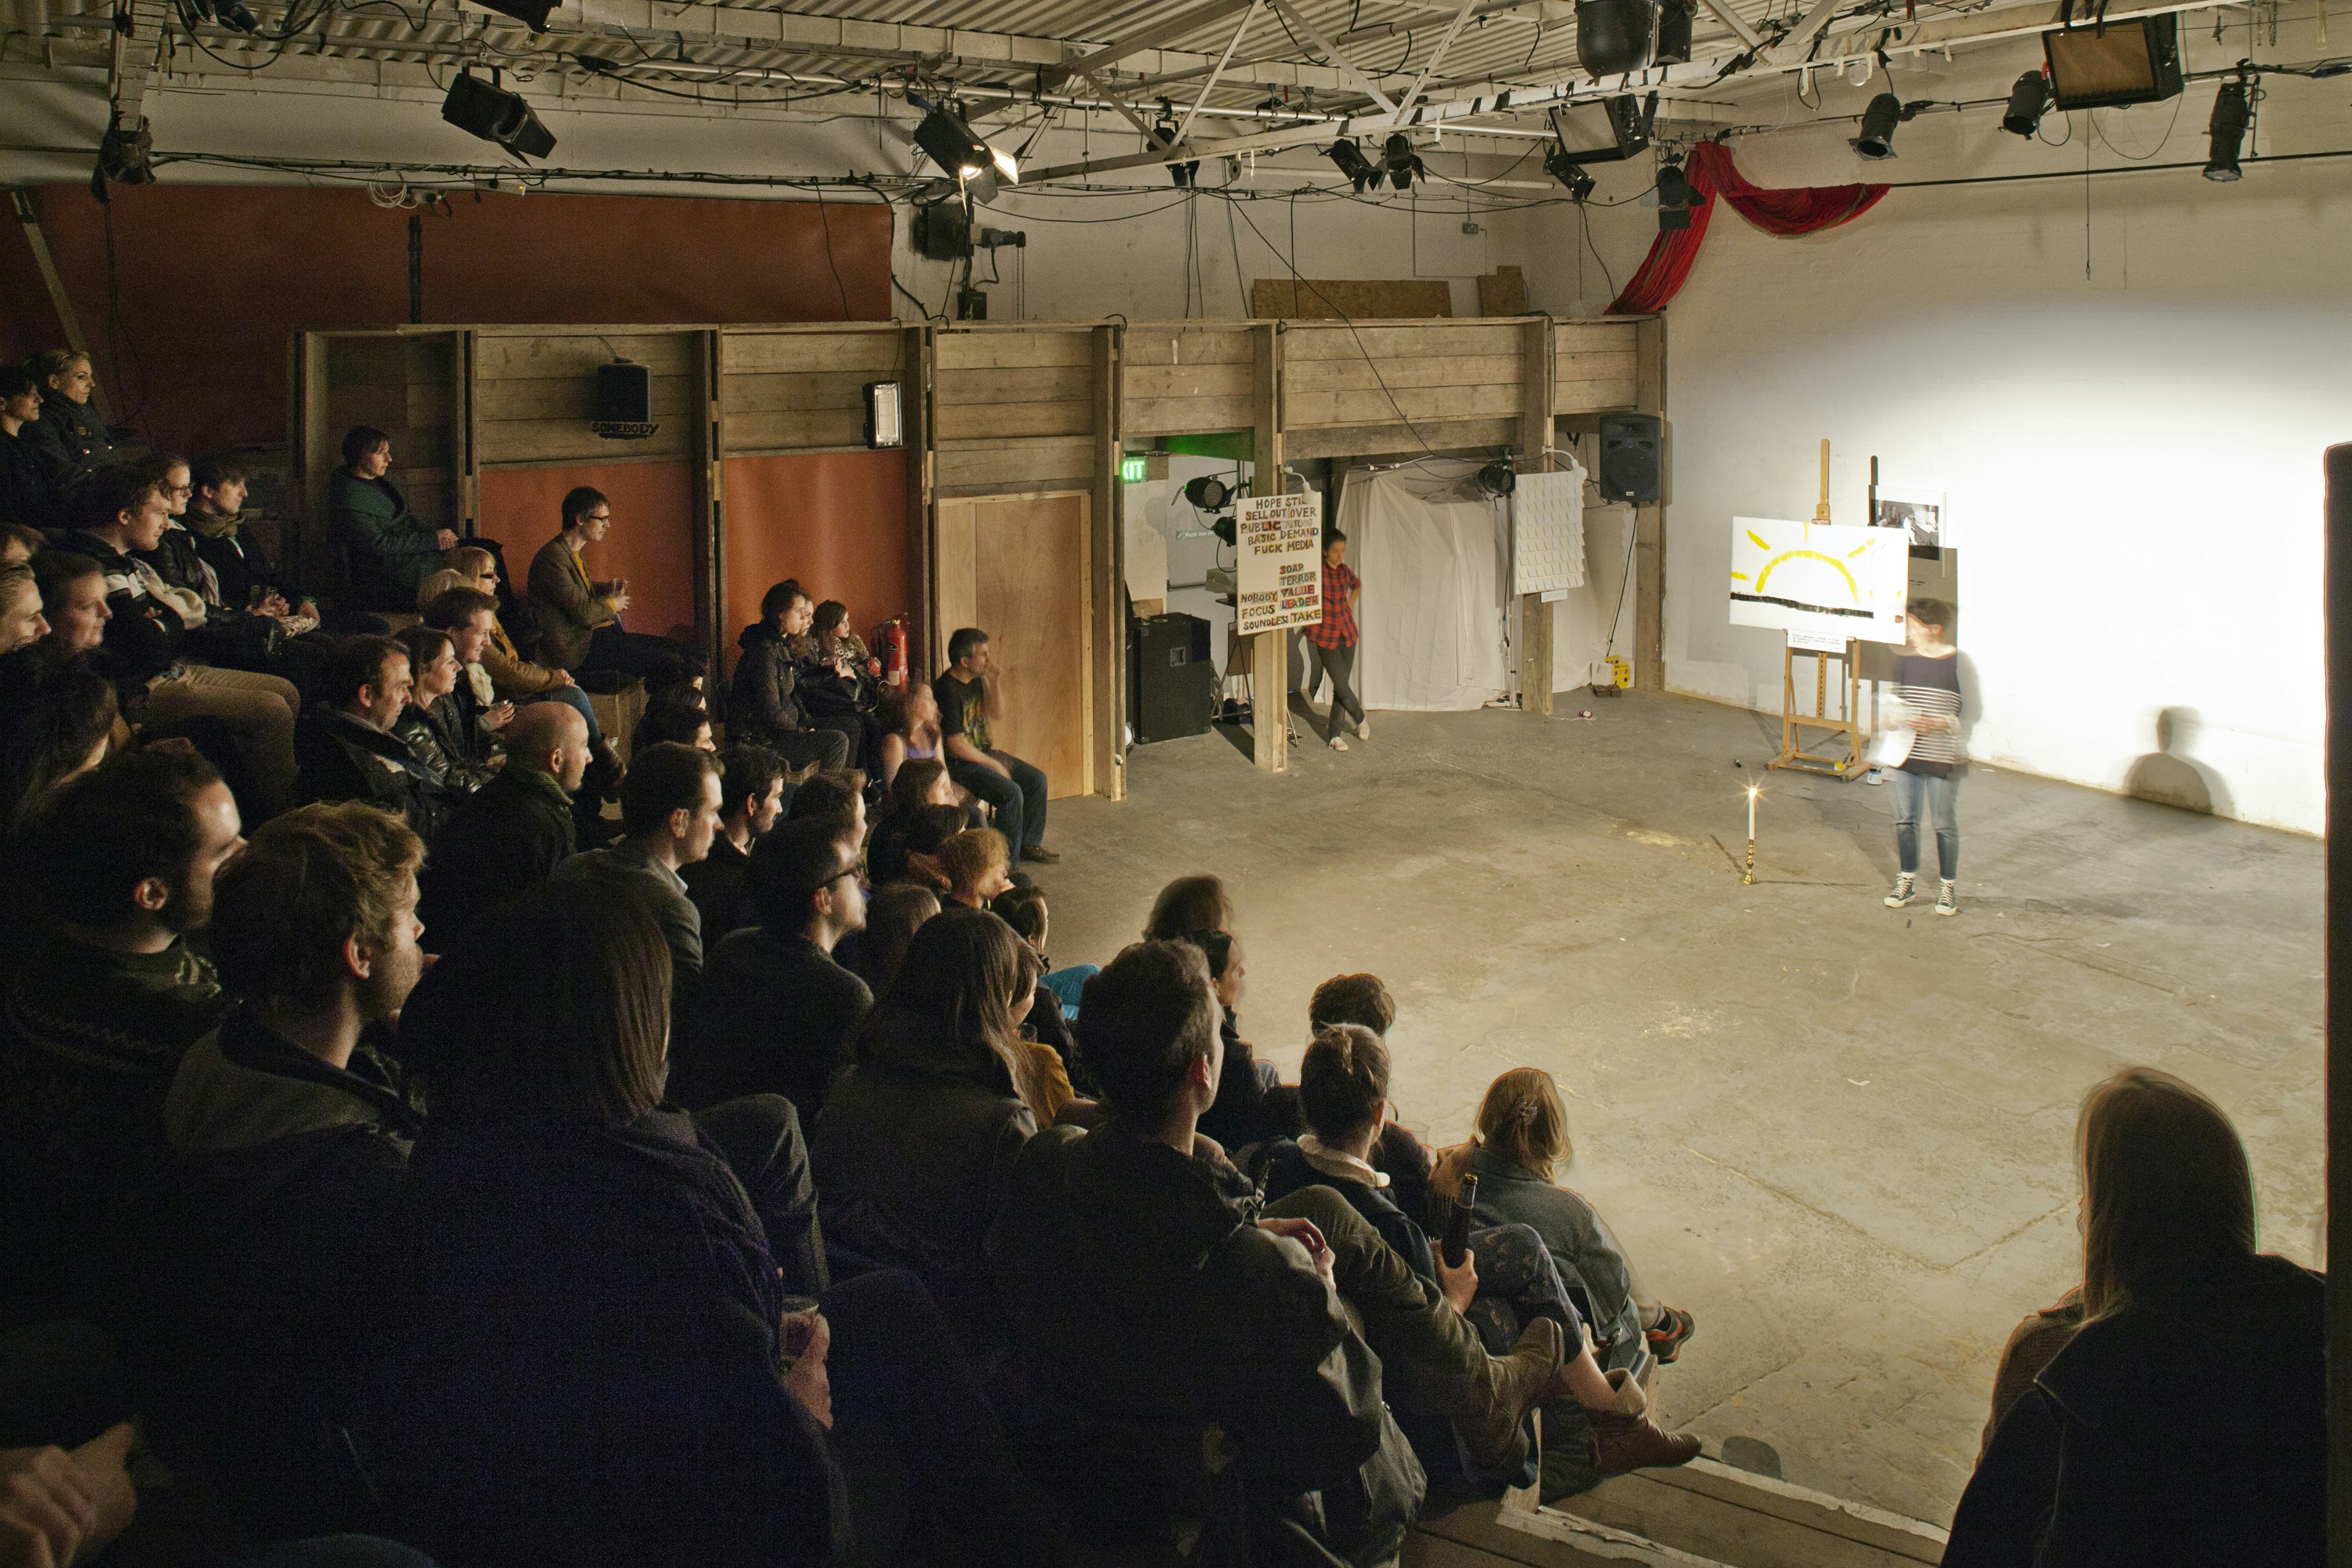 Filming Locations Venues in East London - The Yard Theatre 